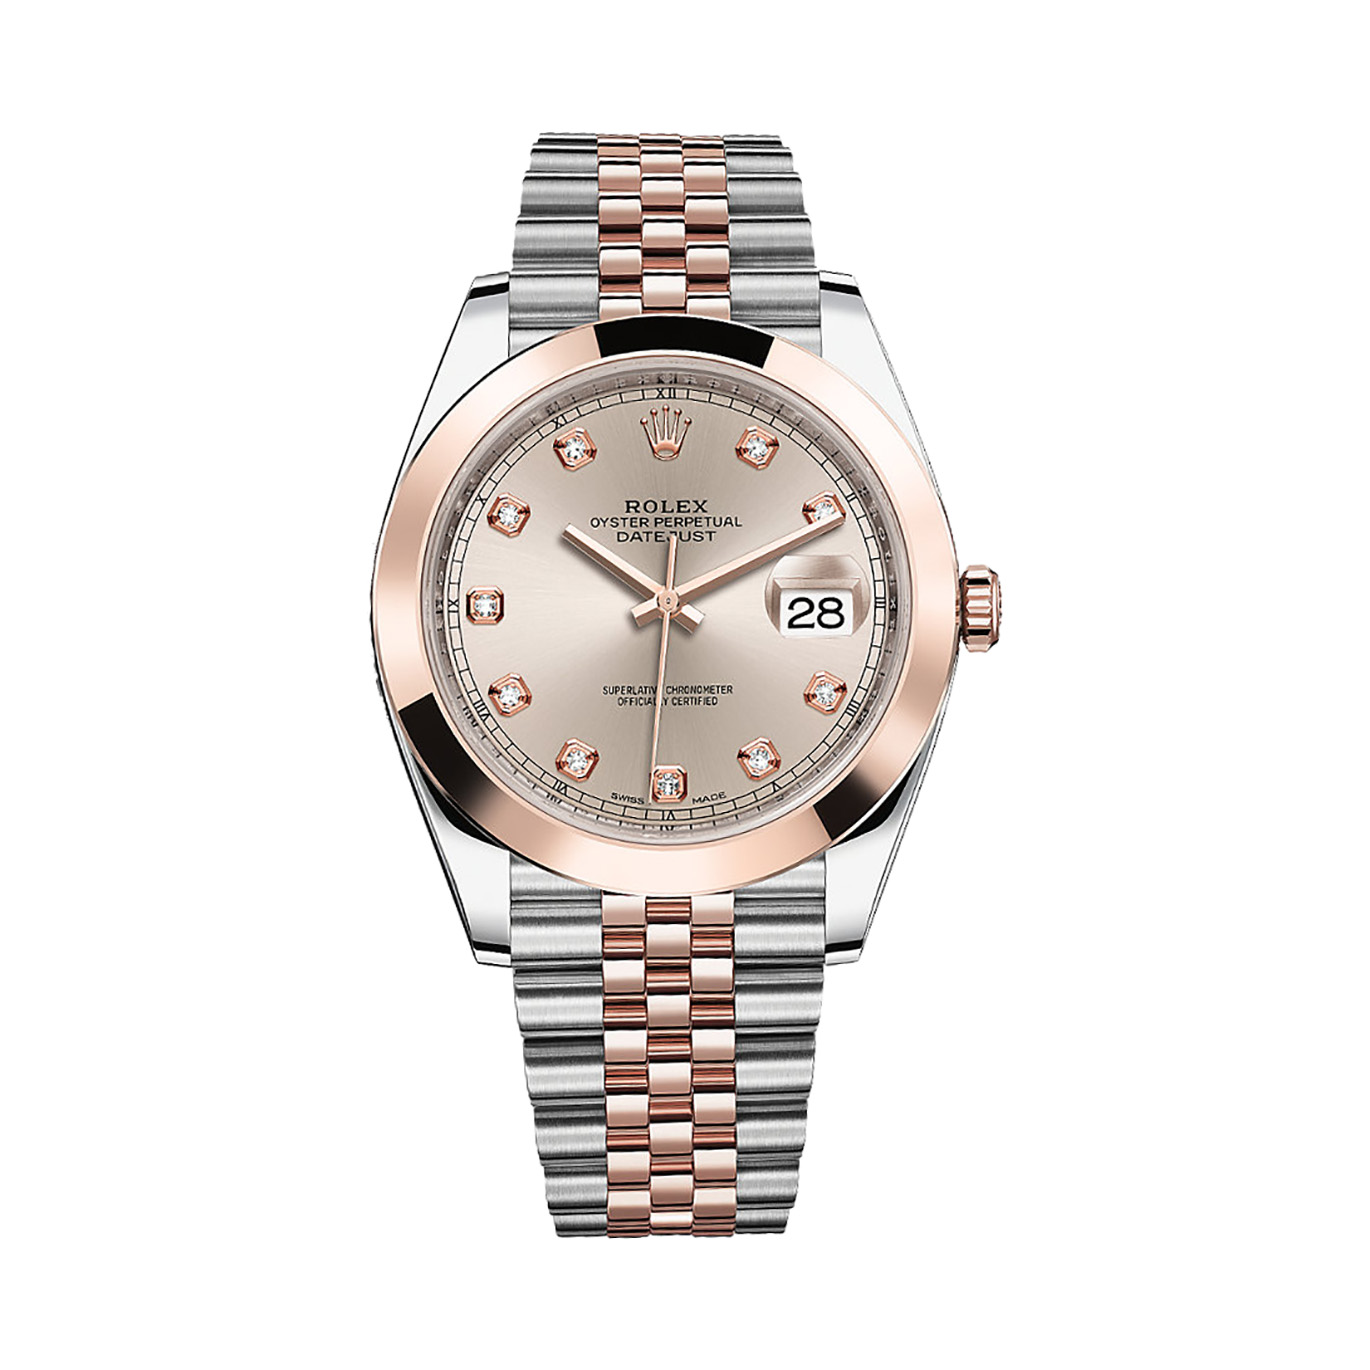 Datejust 41 126301 Rose Gold & Stainless Steel Watch (Sundust Set With Diamonds)